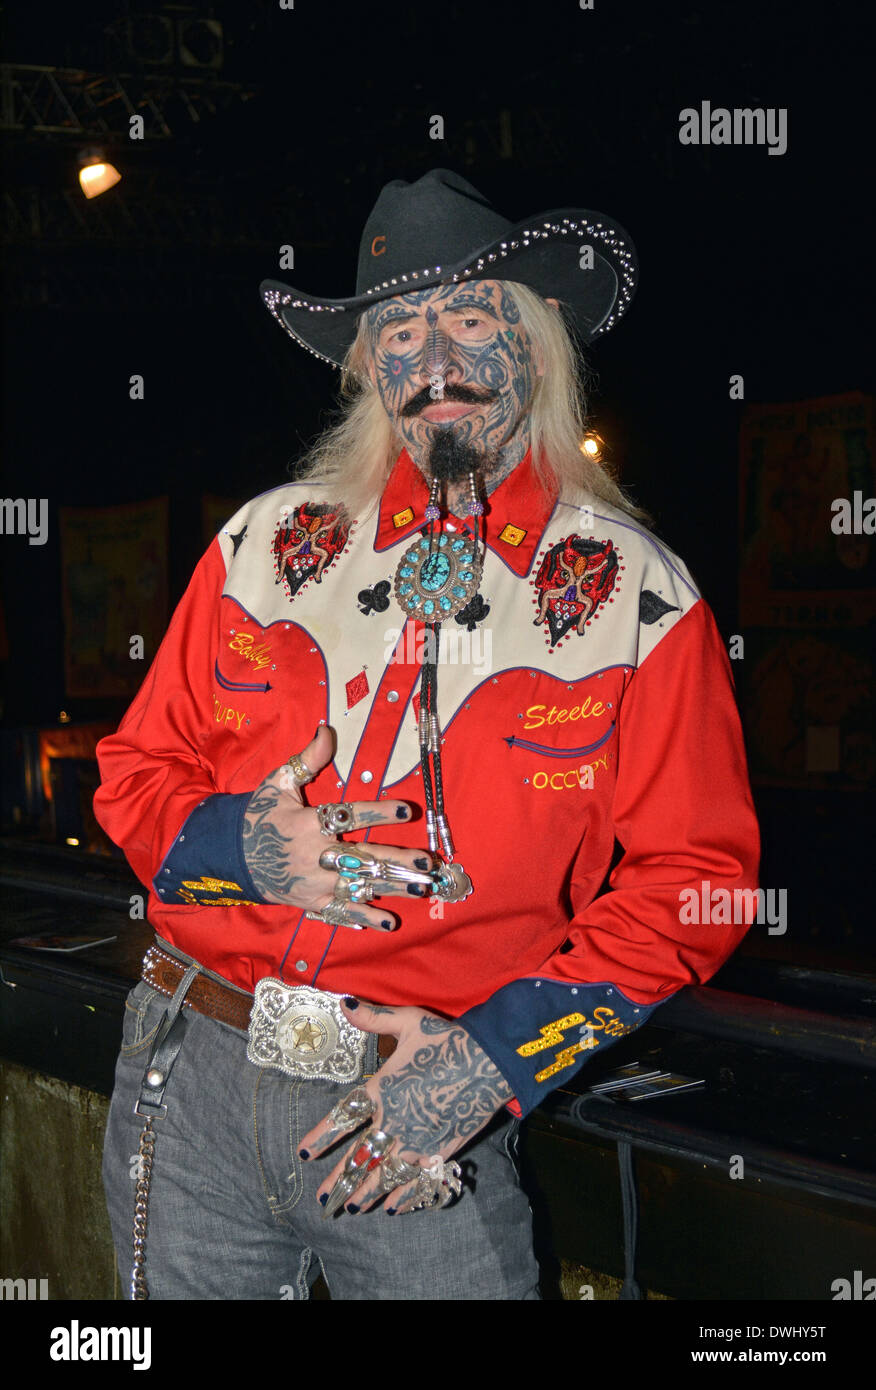 Outlaw Bobby Steele at the New York City Tattoo Convention at the Roseland Ballroom in Manhattan. Stock Photo